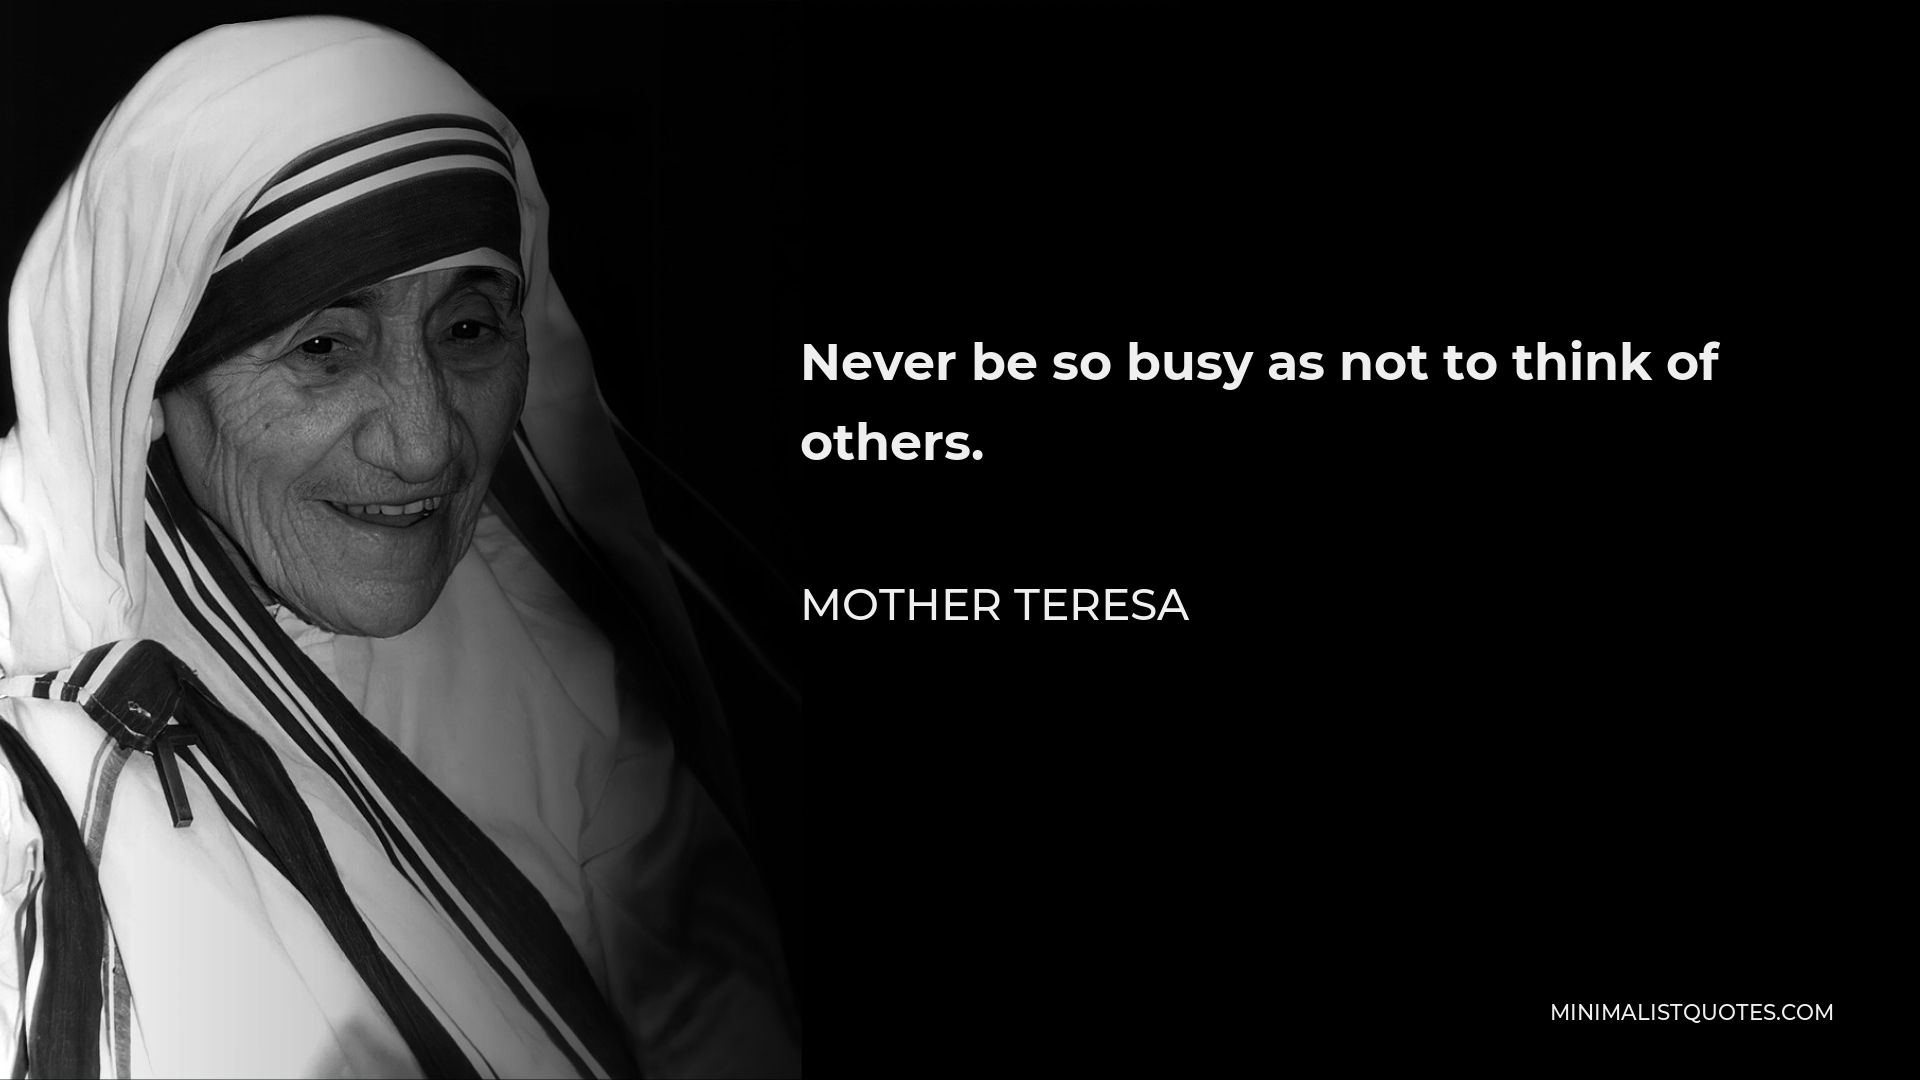 Mother Teresa Quote - Never be so busy as not to think of others.